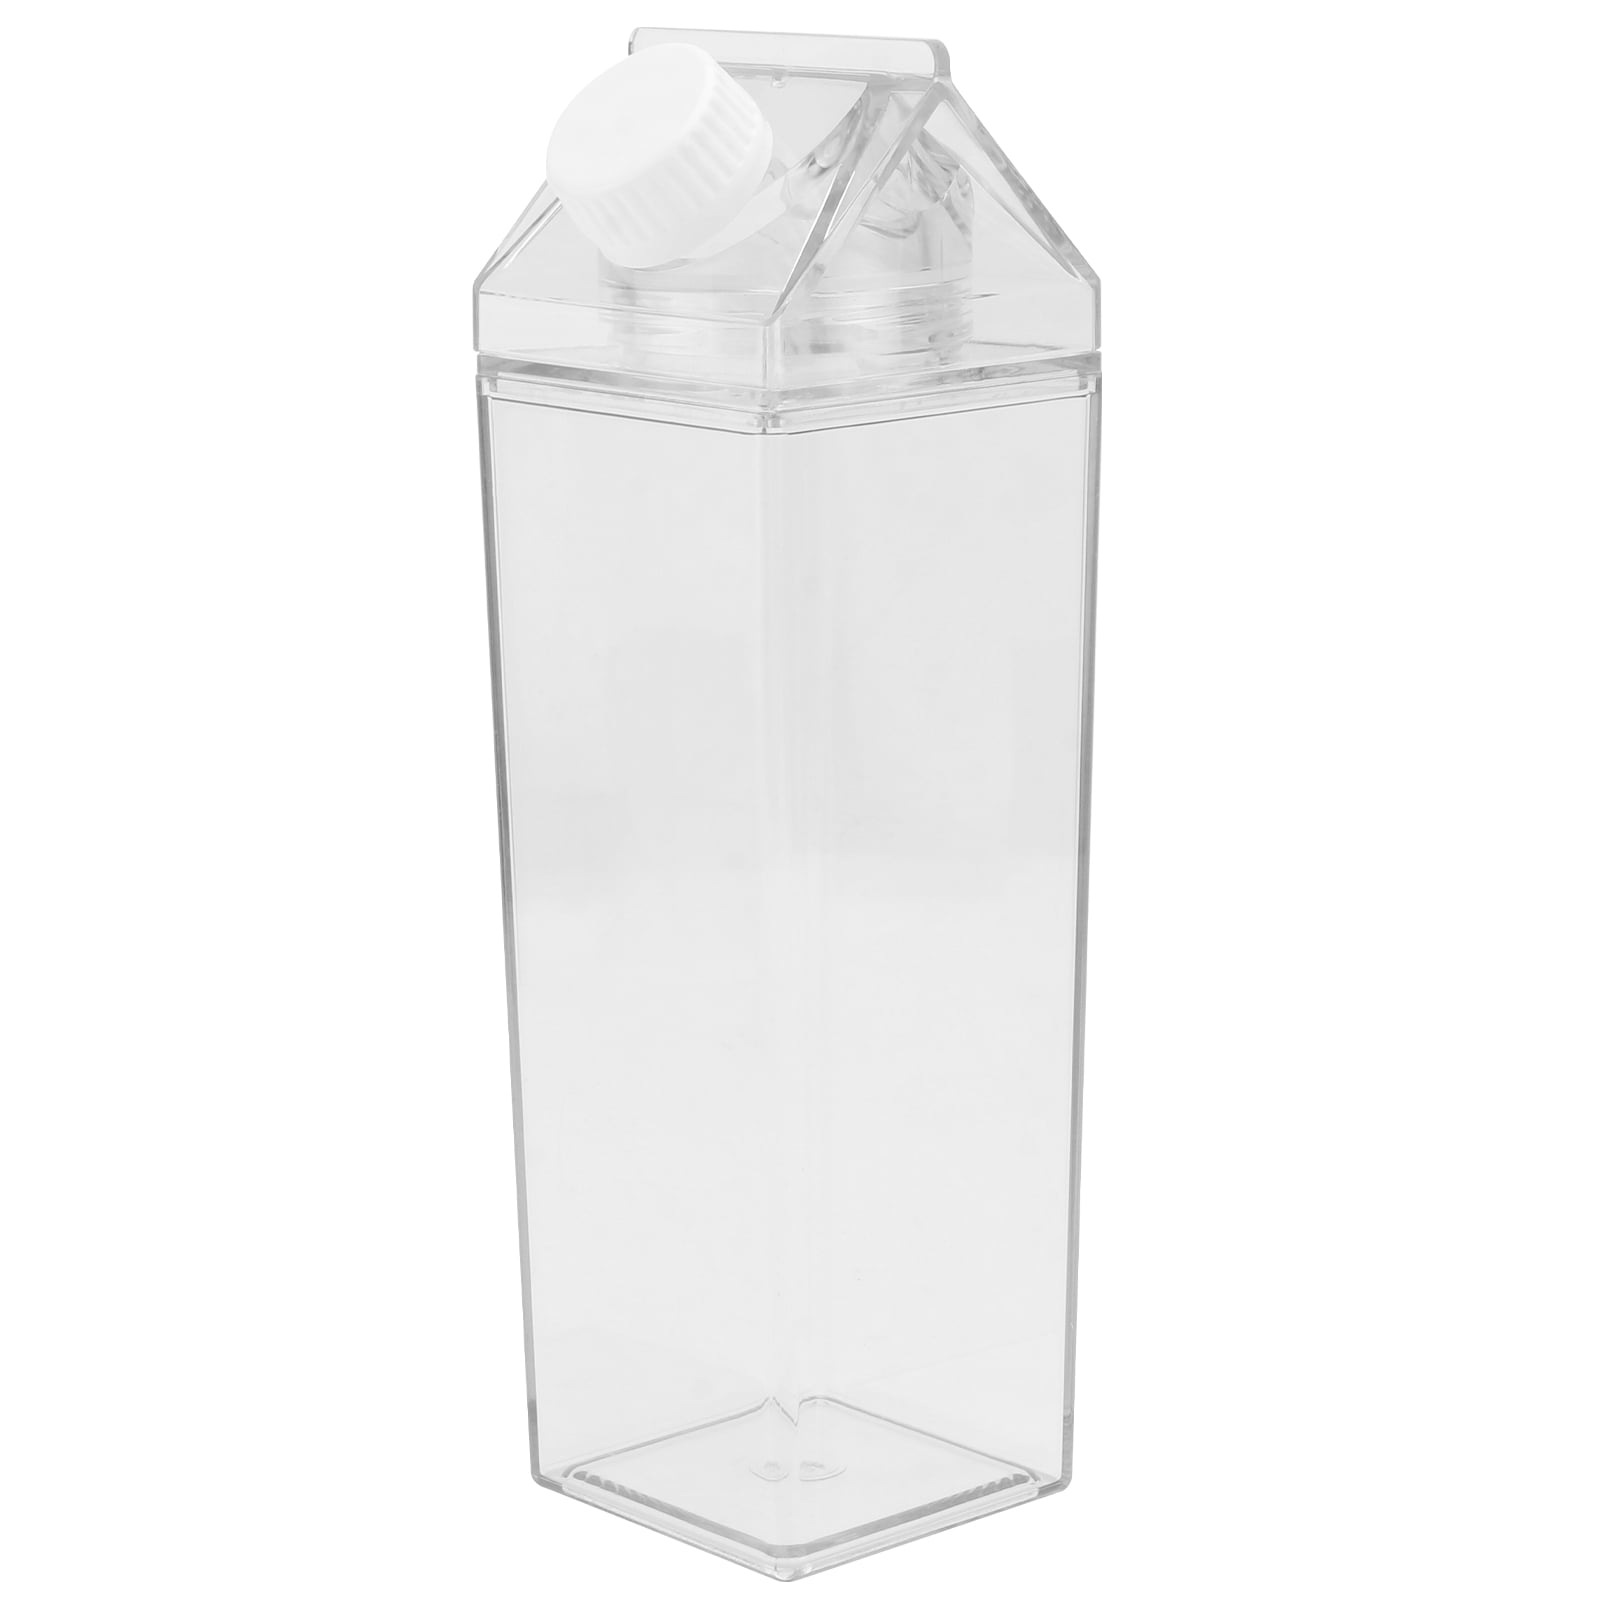 Cornucopia 32oz Plastic Jugs (6-Pack); 1-Quart / 32-Ounce Bottles with Caps  for Juice, Water, Sports and Protein Drinks and Milk, BPA-Free 